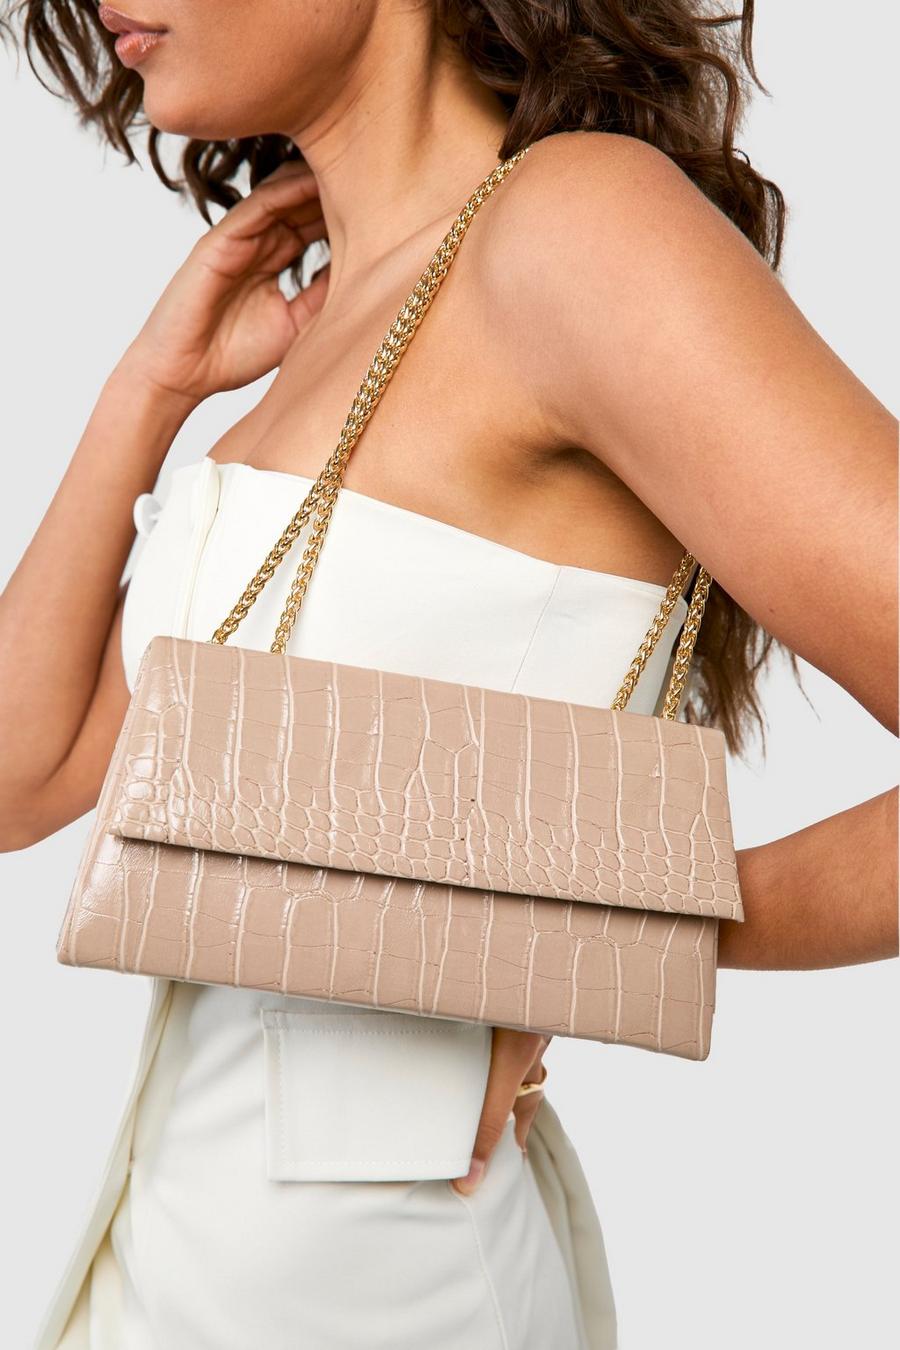 Nude Croc Structured Crossbody Chain Bag